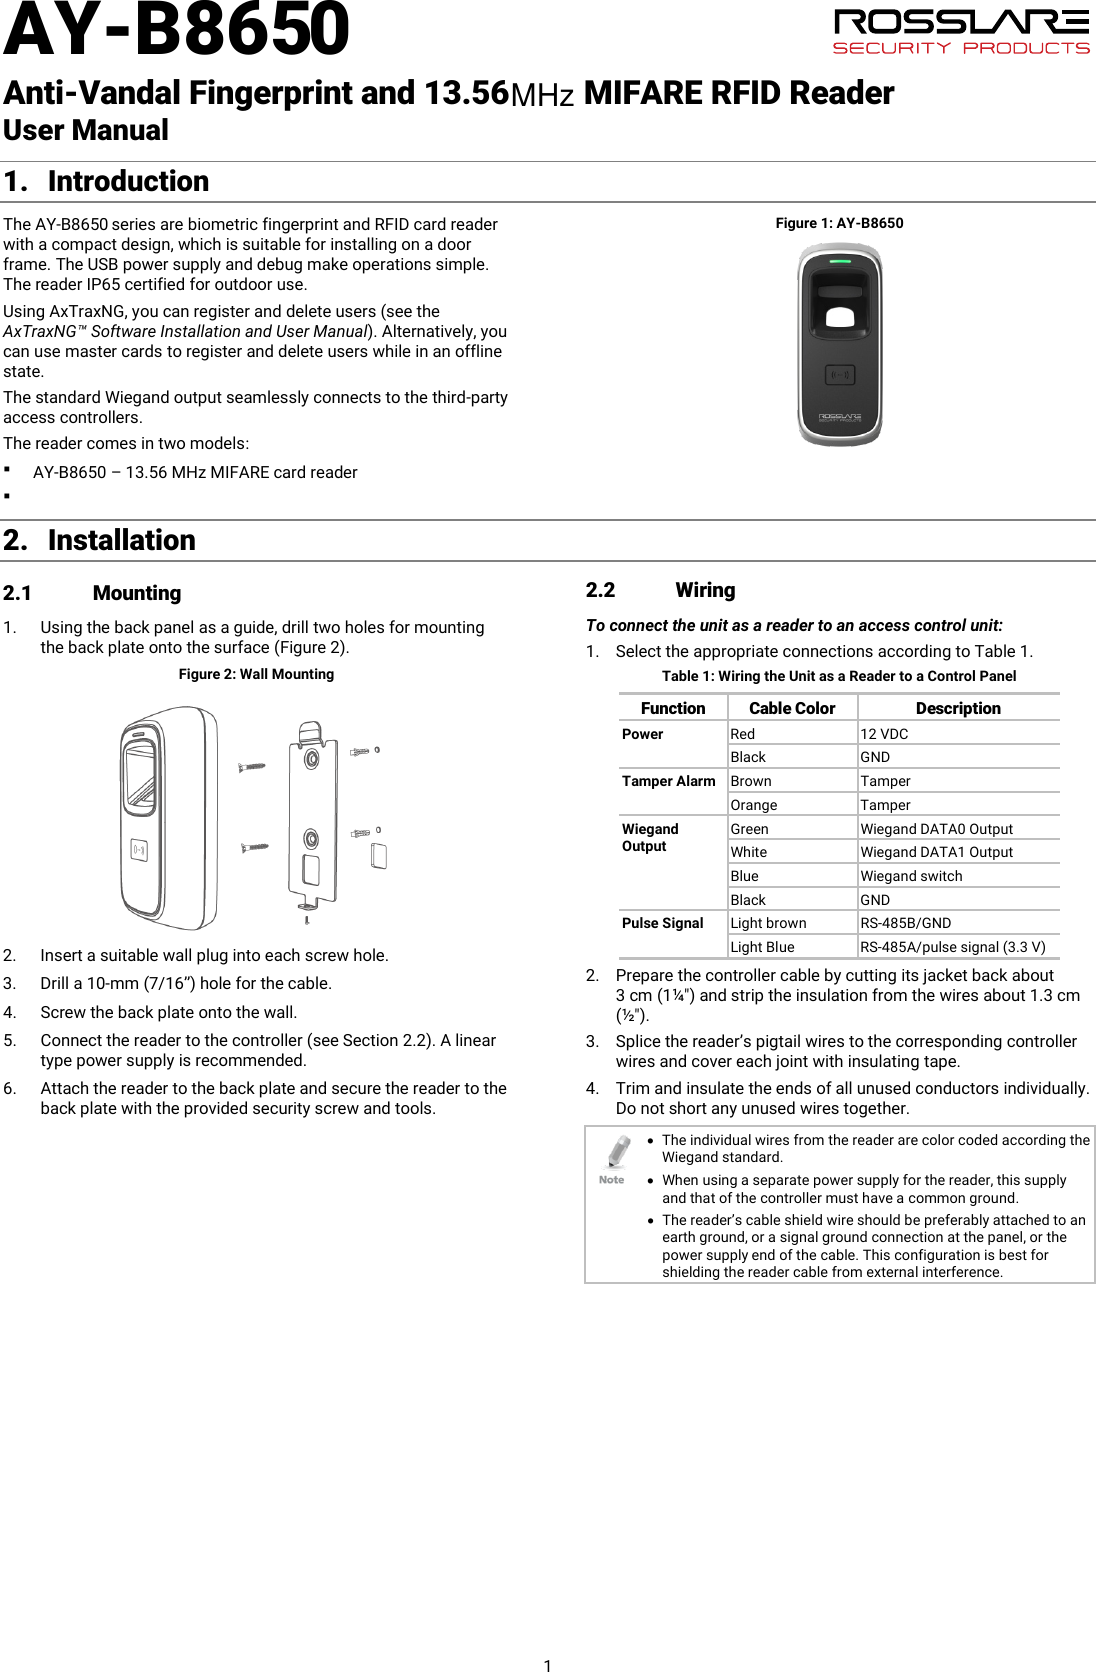 AY-B8650   Anti-Vandal Fingerprint and 13.56         MIFARE RFID Reader User Manual 1 1. Introduction The AY-B8650 series are biometric fingerprint and RFID card reader with a compact design, which is suitable for installing on a door frame. The USB power supply and debug make operations simple. The reader IP65 certified for outdoor use. Using AxTraxNG, you can register and delete users (see the AxTraxNG™ Software Installation and User Manual). Alternatively, you can use master cards to register and delete users while in an offline state. The standard Wiegand output seamlessly connects to the third-party access controllers. The reader comes in two models:   AY-B8650 – 13.56 MHz MIFARE card reader Figure 1: AY-B8650 2. Installation 2.1 Mounting 1. Using the back panel as a guide, drill two holes for mounting the back plate onto the surface (Figure 2). Figure 2: Wall Mounting  2. Insert a suitable wall plug into each screw hole. 3. Drill a 10-mm (7/16”) hole for the cable. 4. Screw the back plate onto the wall. 5. Connect the reader to the controller (see Section  2.2). A linear type power supply is recommended. 6. Attach the reader to the back plate and secure the reader to the back plate with the provided security screw and tools. 2.2 Wiring To connect the unit as a reader to an access control unit: 1. Select the appropriate connections according to Table 1. Table 1: Wiring the Unit as a Reader to a Control Panel Function Cable Color Description Power Red 12 VDC Black GND Tamper Alarm Brown Tamper Orange Tamper Wiegand Output Green Wiegand DATA0 Output White Wiegand DATA1 Output Blue Wiegand switch Black GND Pulse Signal Light brown RS-485B/GND Light Blue RS-485A/pulse signal (3.3 V) 2. Prepare the controller cable by cutting its jacket back about 3 cm (1¼&quot;) and strip the insulation from the wires about 1.3 cm (½&quot;). 3. Splice the reader’s pigtail wires to the corresponding controller wires and cover each joint with insulating tape. 4. Trim and insulate the ends of all unused conductors individually. Do not short any unused wires together.  • The individual wires from the reader are color coded according the Wiegand standard. • When using a separate power supply for the reader, this supply and that of the controller must have a common ground. • The reader’s cable shield wire should be preferably attached to an earth ground, or a signal ground connection at the panel, or the power supply end of the cable. This configuration is best for shielding the reader cable from external interference.  MHz